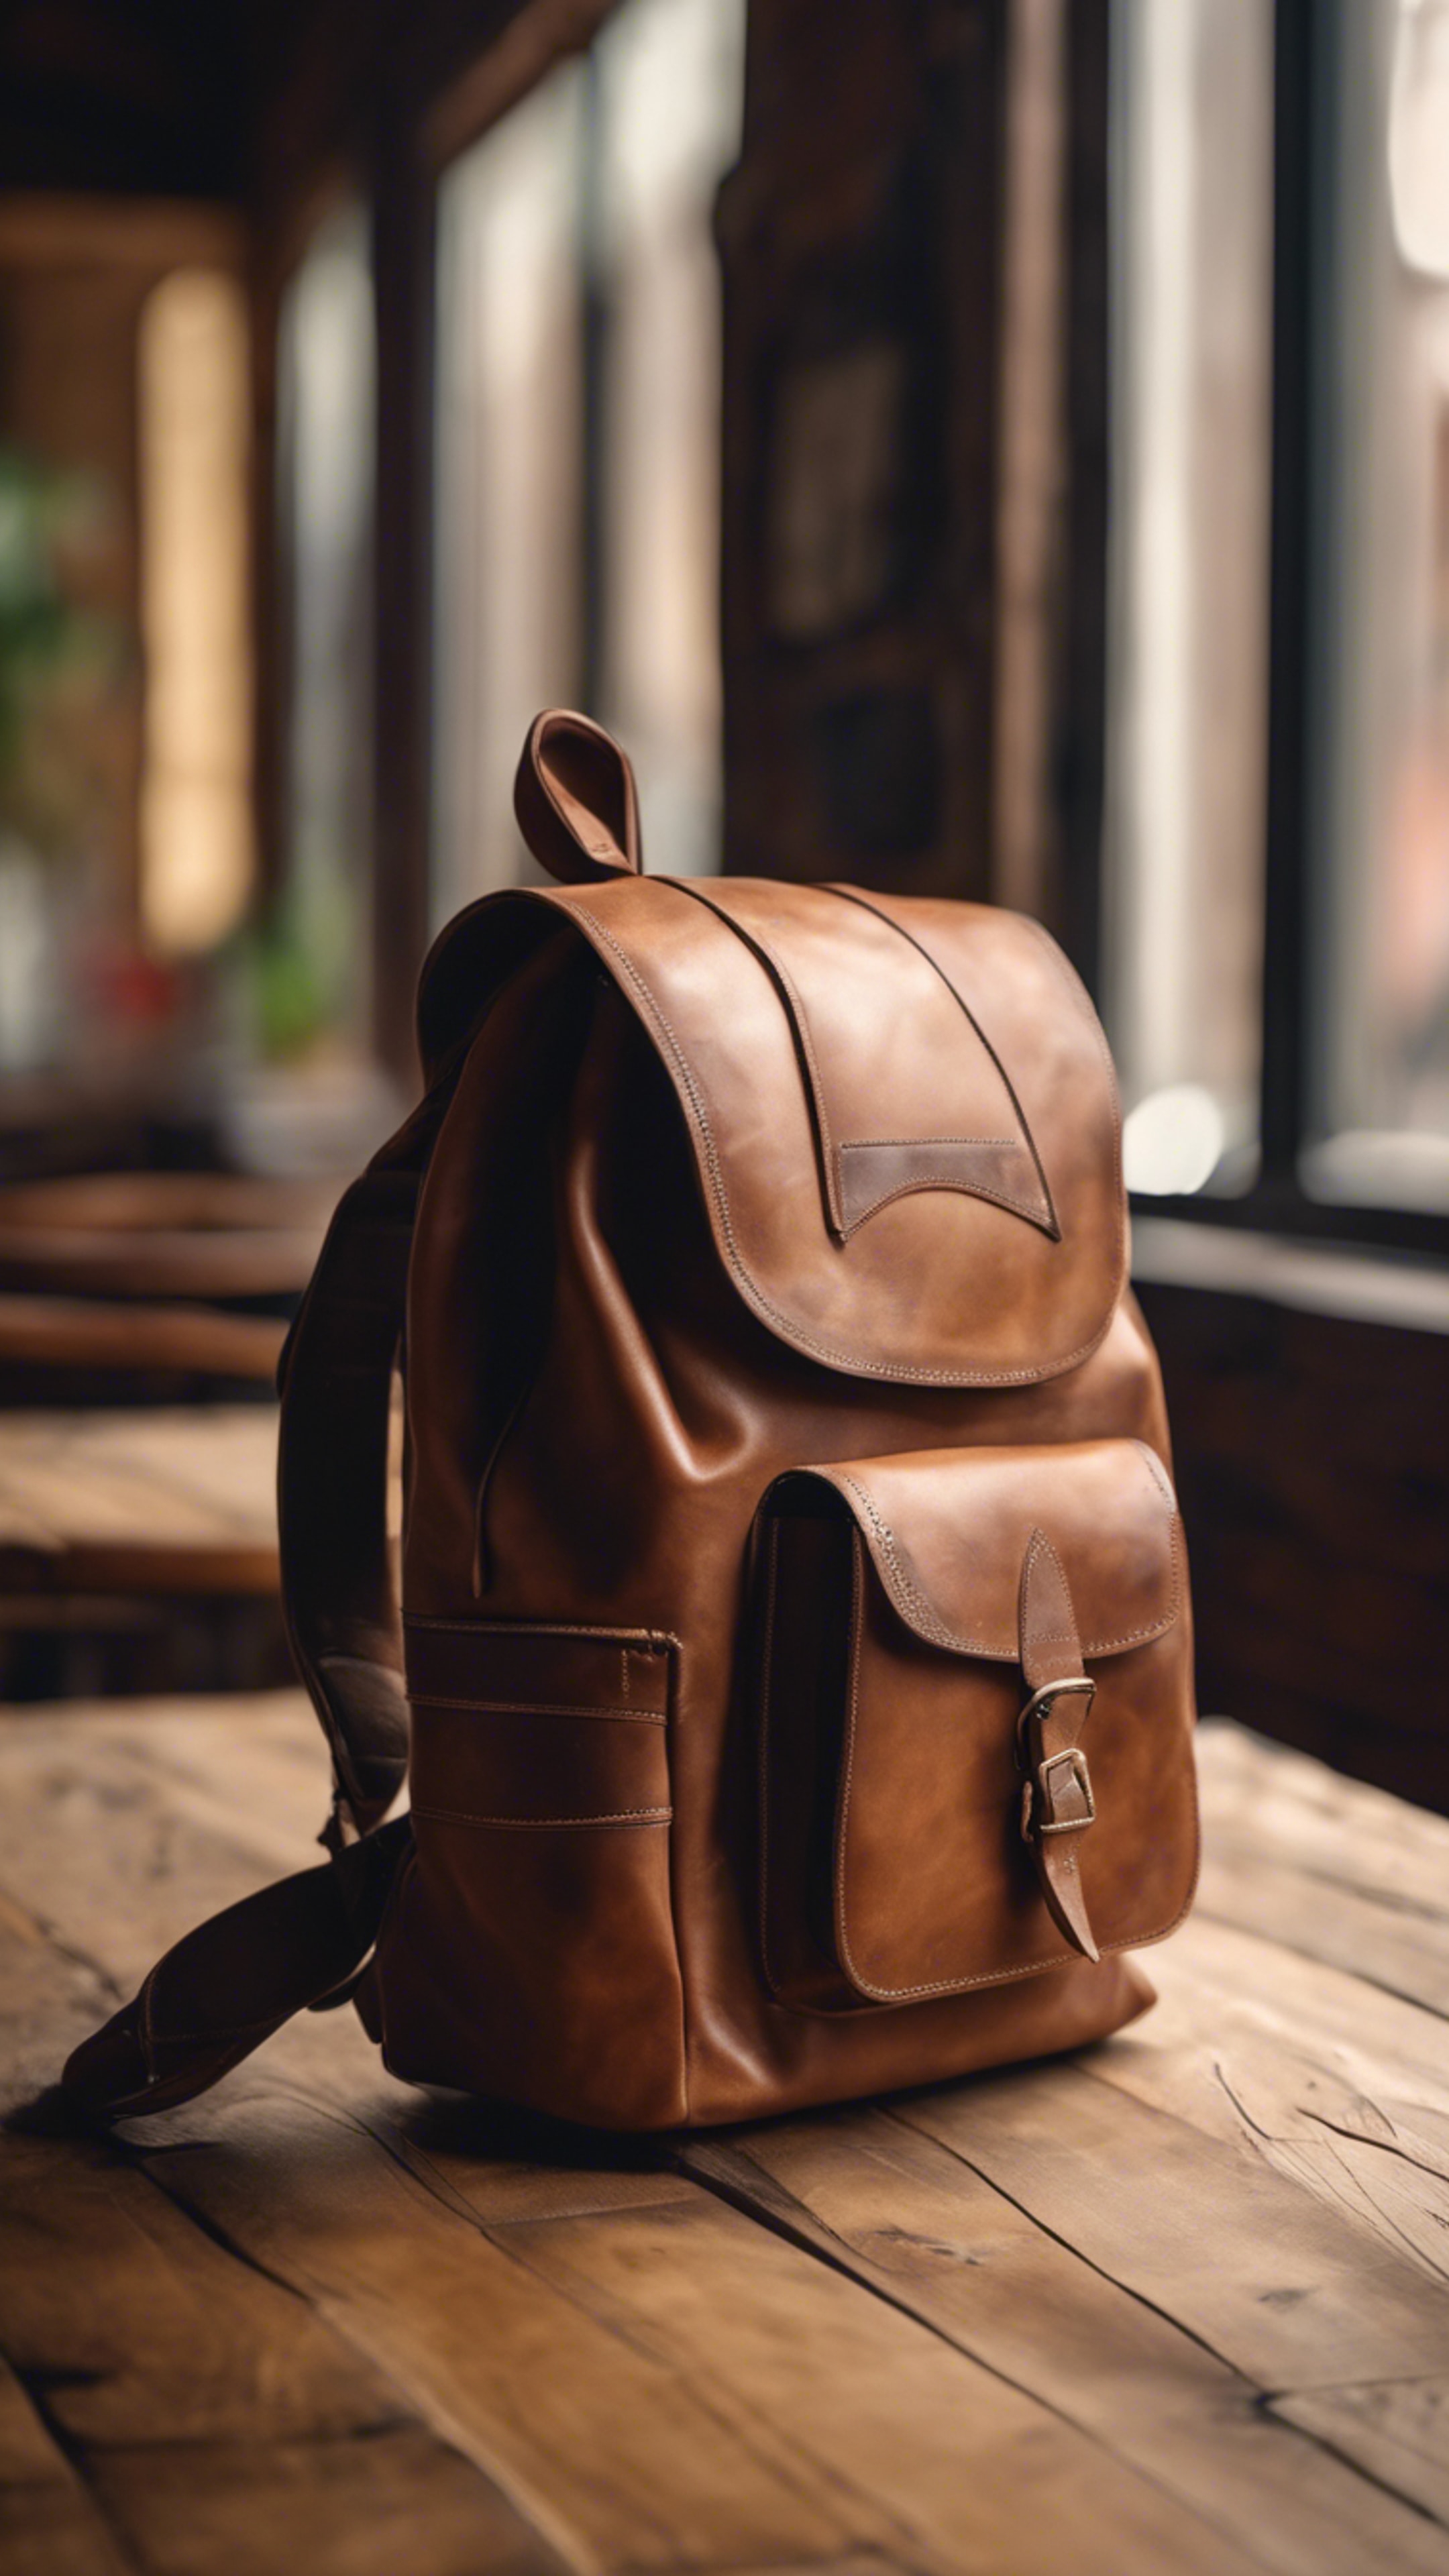 A vintage brown leather backpack sitting on a wooden table in a cozy café. Wallpaper[7ce12483b5e34217b072]